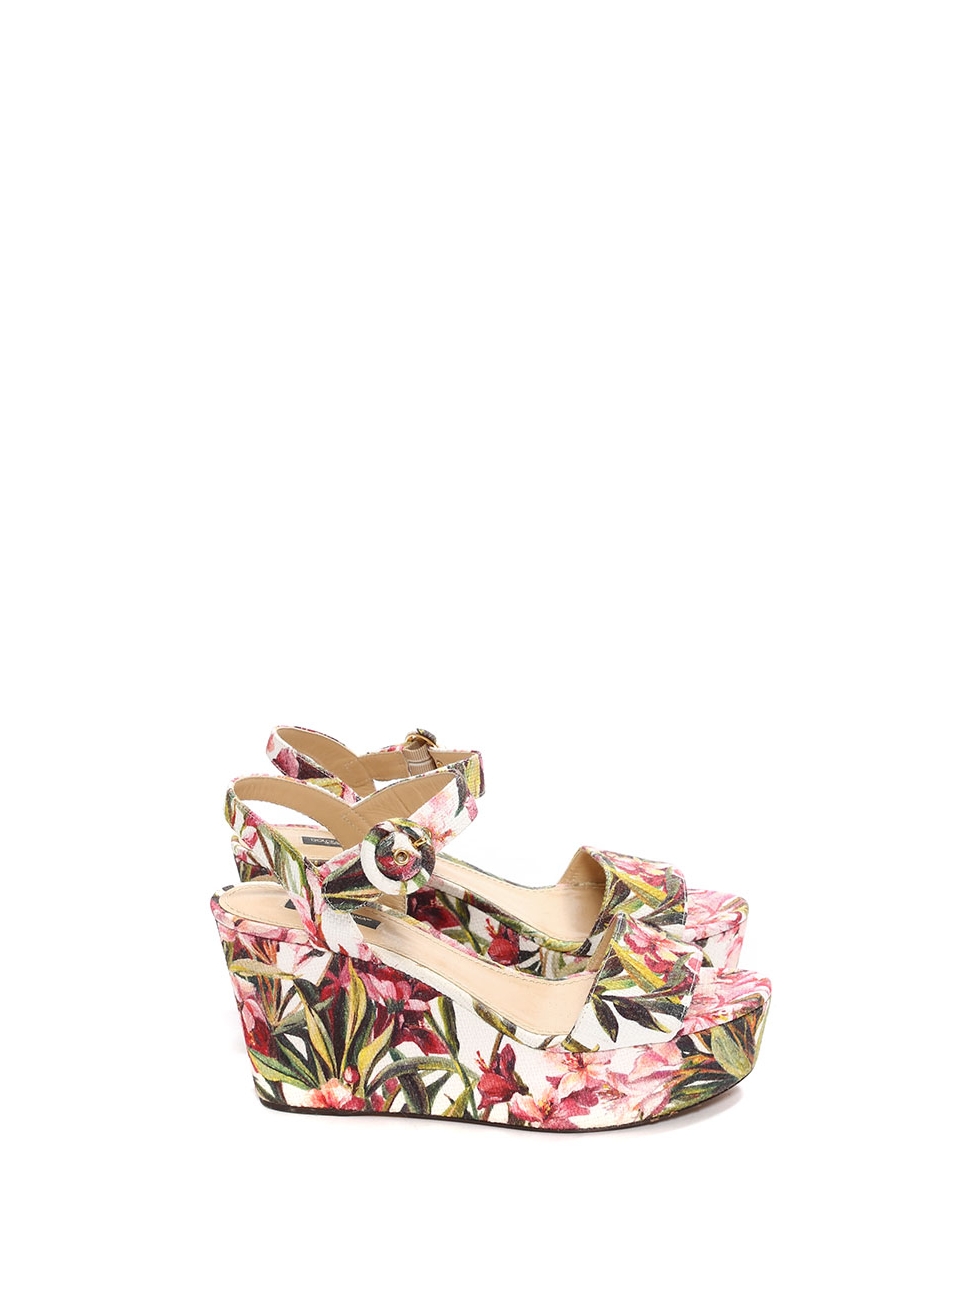 Boutique DOLCE & GABBANA Pink and green floral print canvas BIANCA wedge  sandals Retail price €575 Size 40